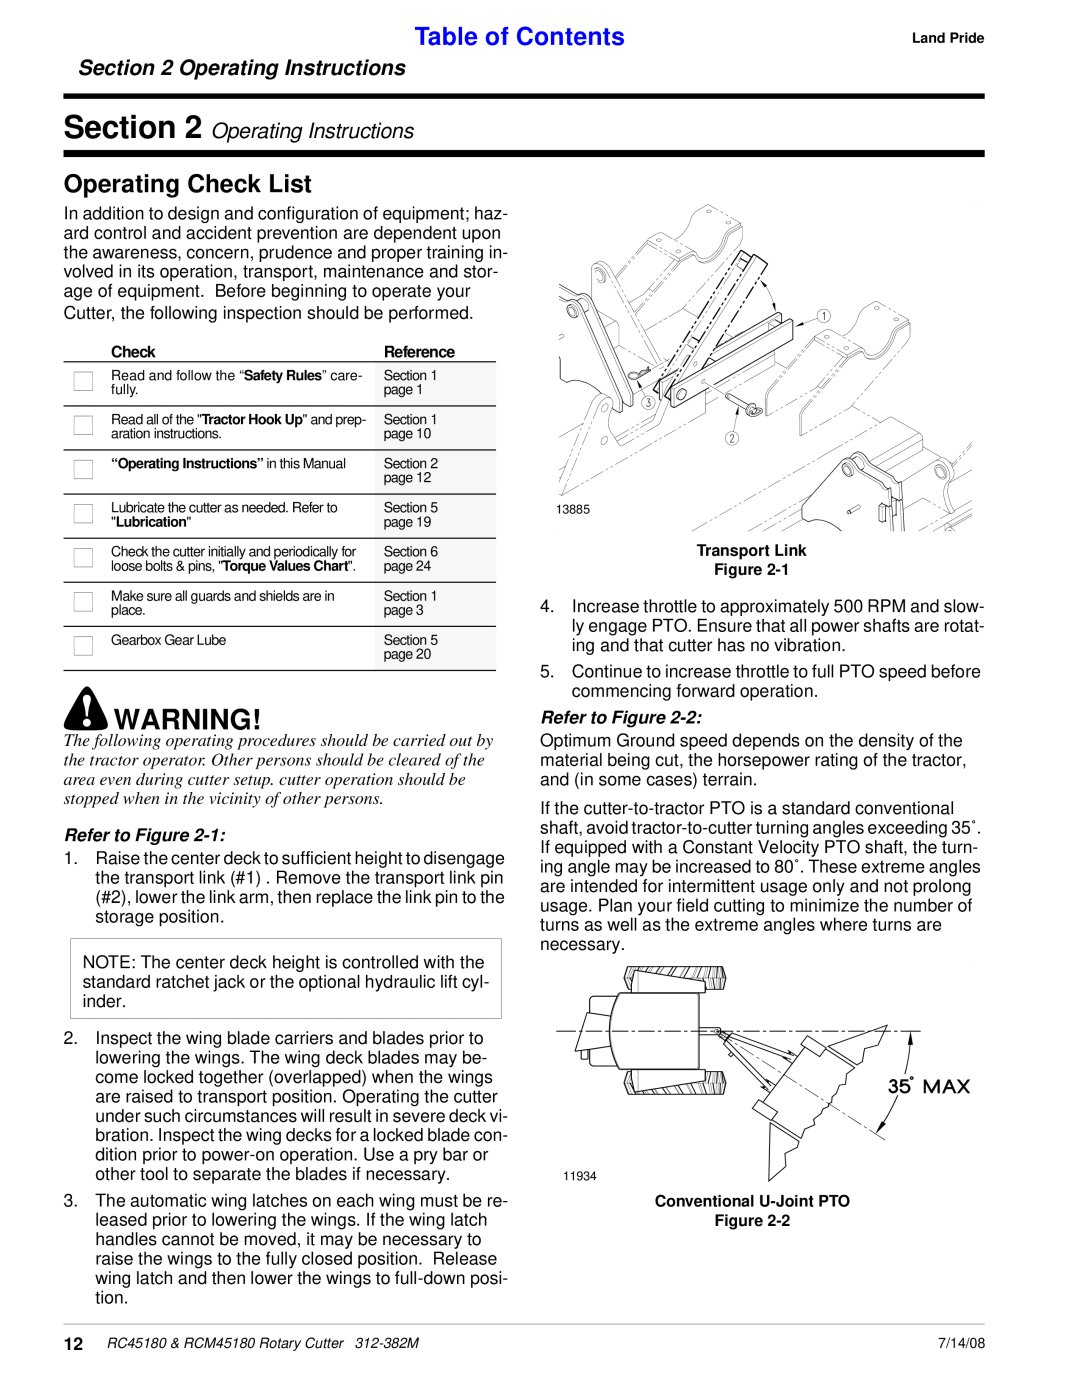 Land Pride RC45180, RCM45180 manual Operating Check List, Operating Instructions, Table of Contents, Refer to Figure 